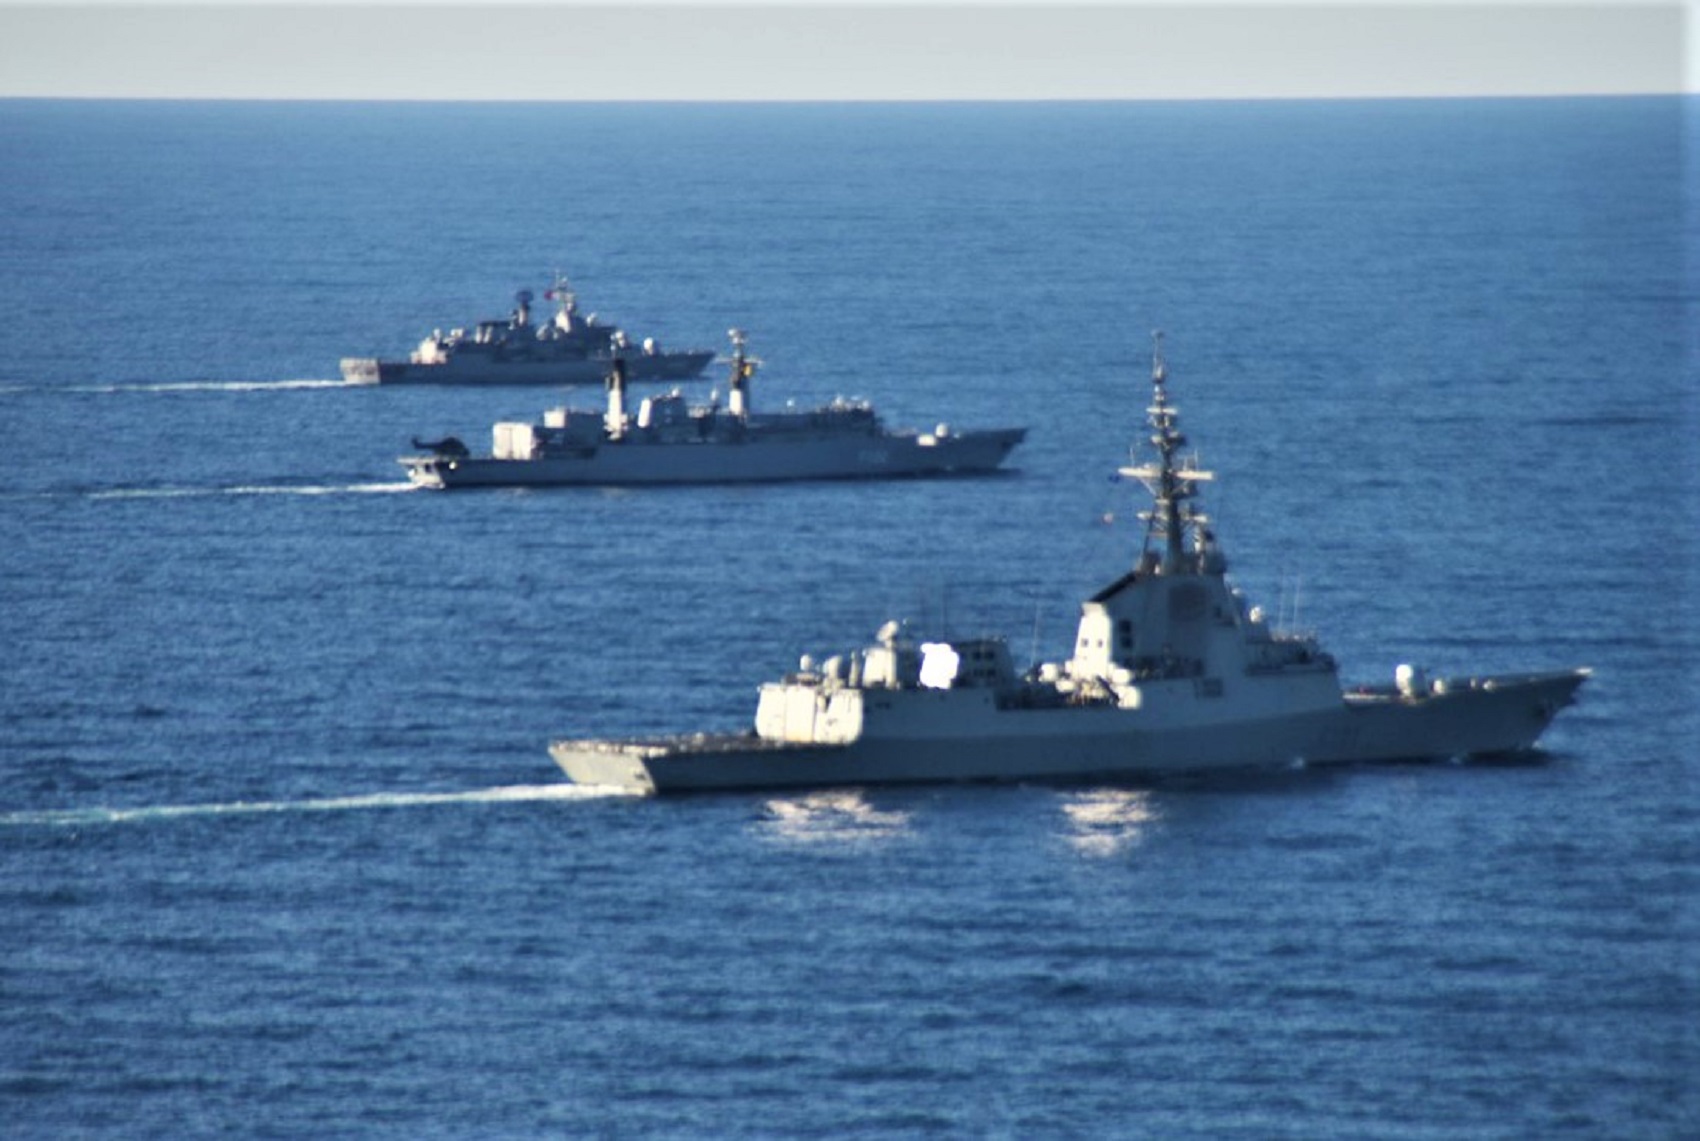 The ‘Álvaro de Bazán’ frigate takes part in exercises with allied countries in the Black Sea